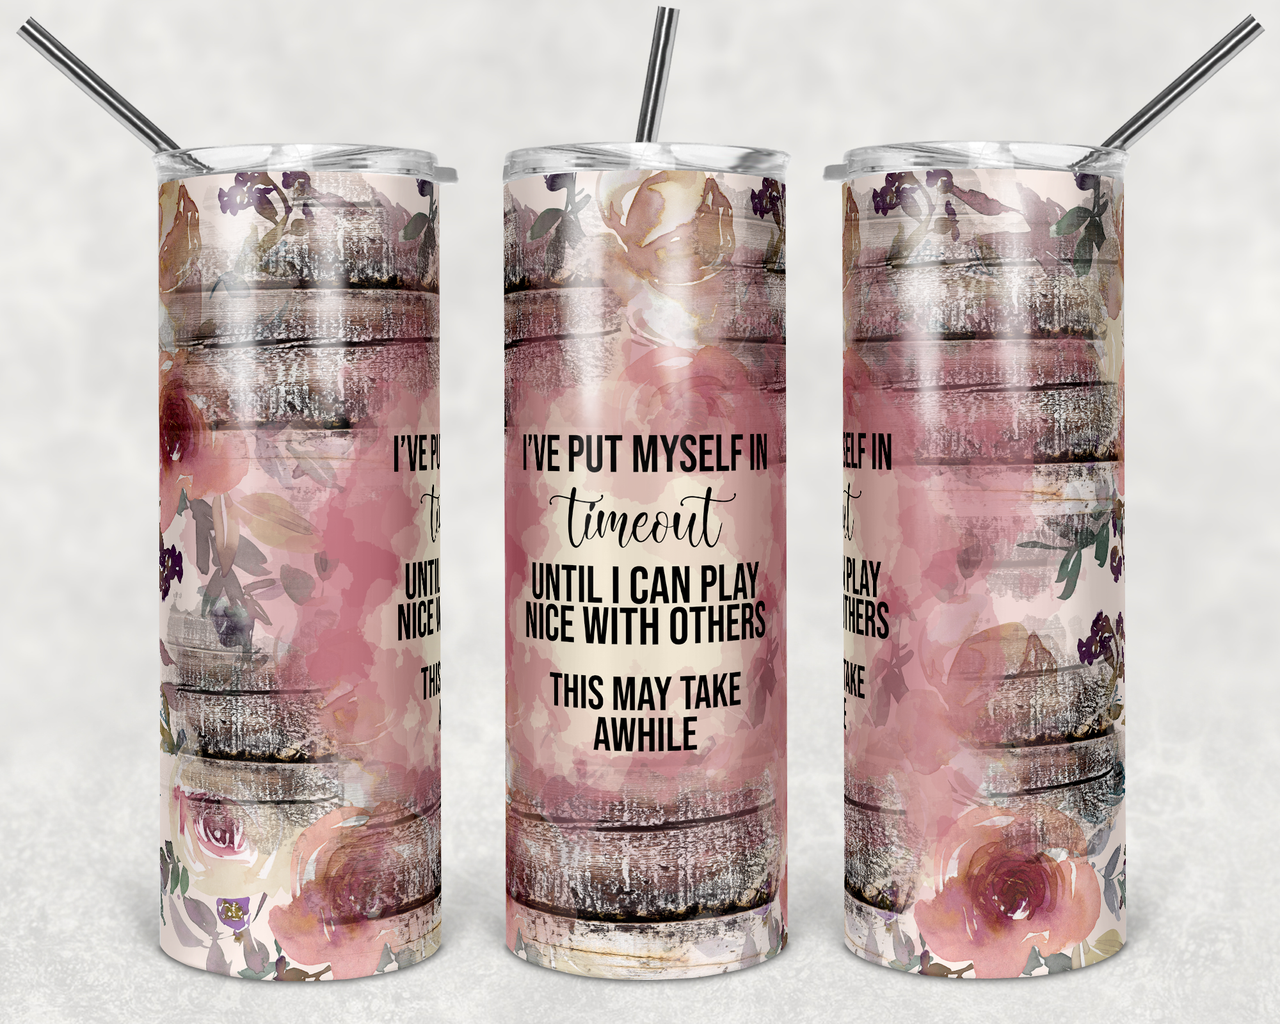 https://cdn11.bigcommerce.com/s-lprv6zu1a8/images/stencil/1280x1280/products/478/1460/floral_and_wood_splashes_rose_and_peach_timeout_mock__41597.1641320060.png?c=2